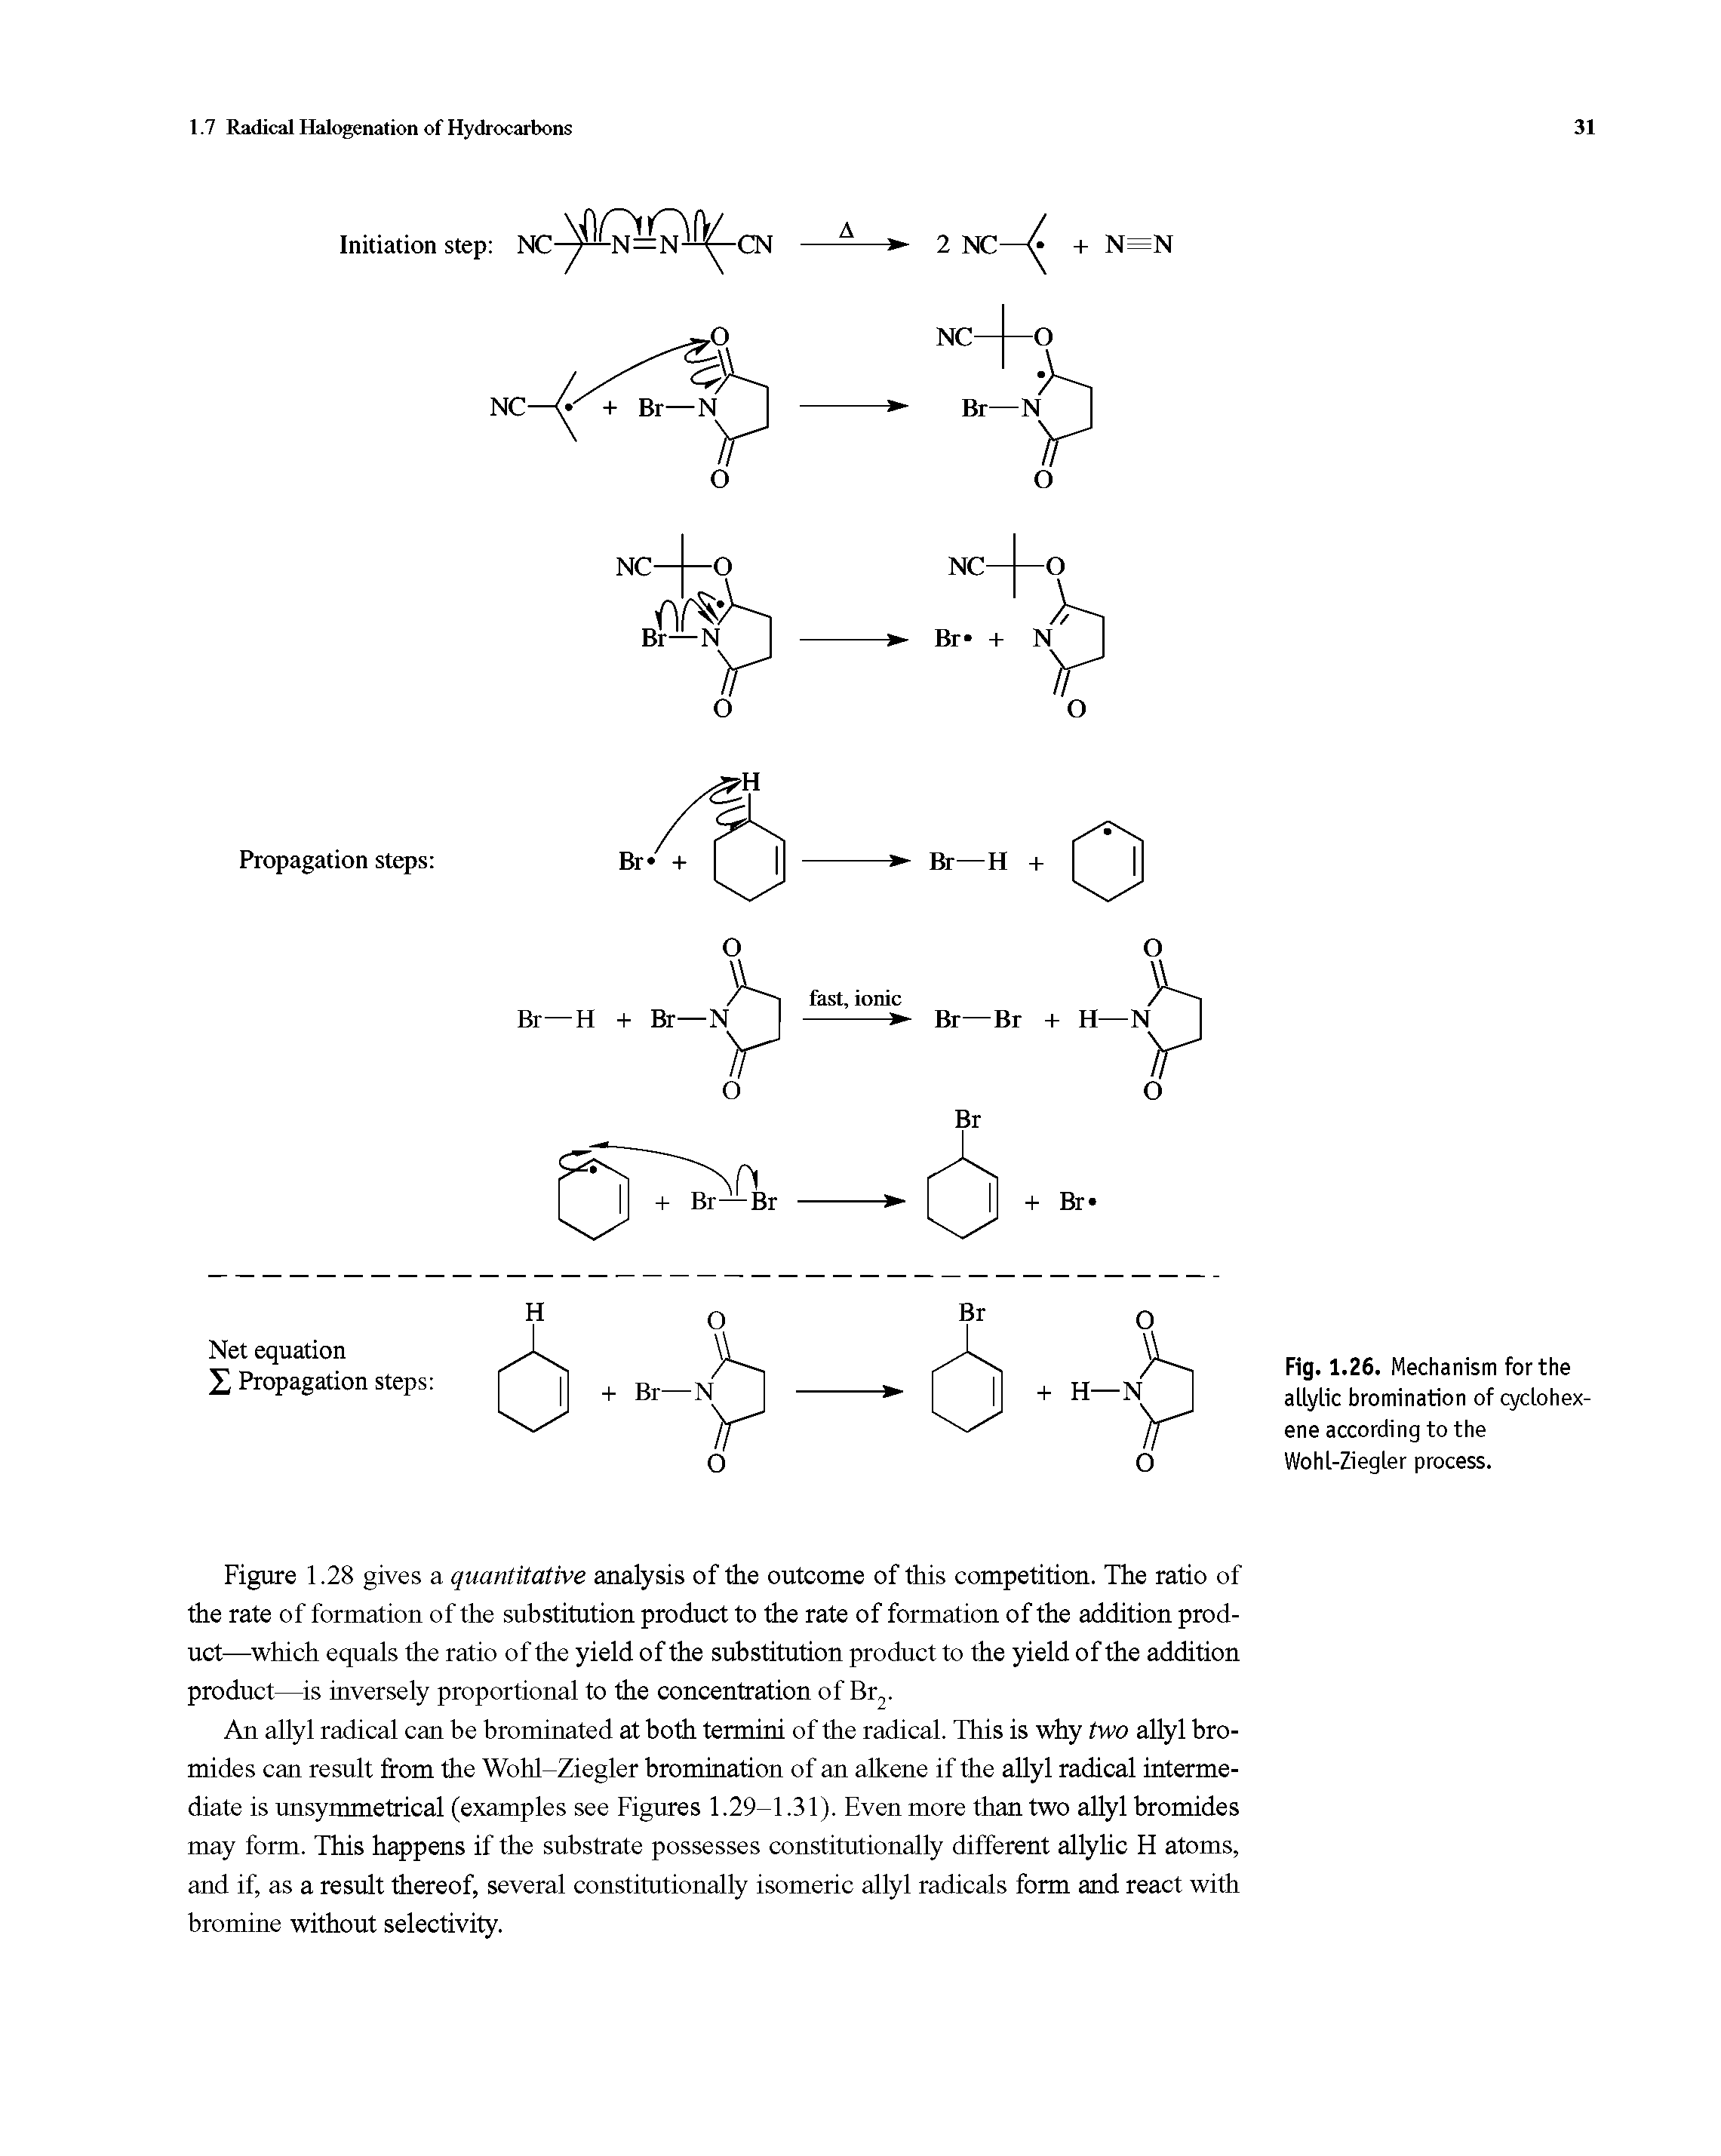 Fig. 1.26. Mechanism for the allylic bromination of cyctohex-ene according to the Wohl-Ziegter process.